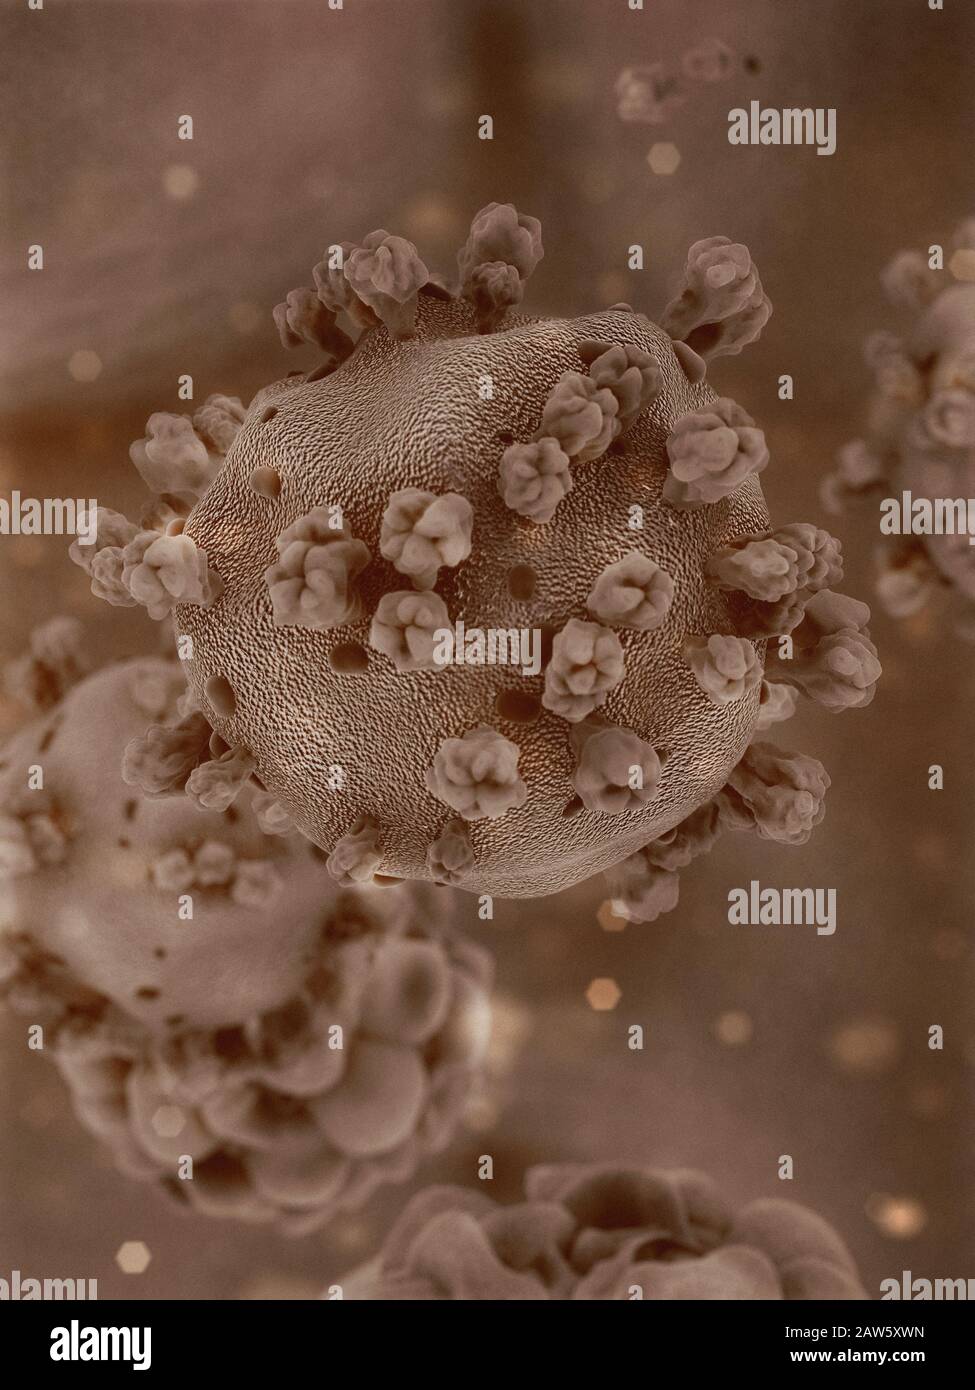 Scientific illustration of the Coronavirus from Wuhan, China. 3D render based on microscopic images of the virus Stock Photo